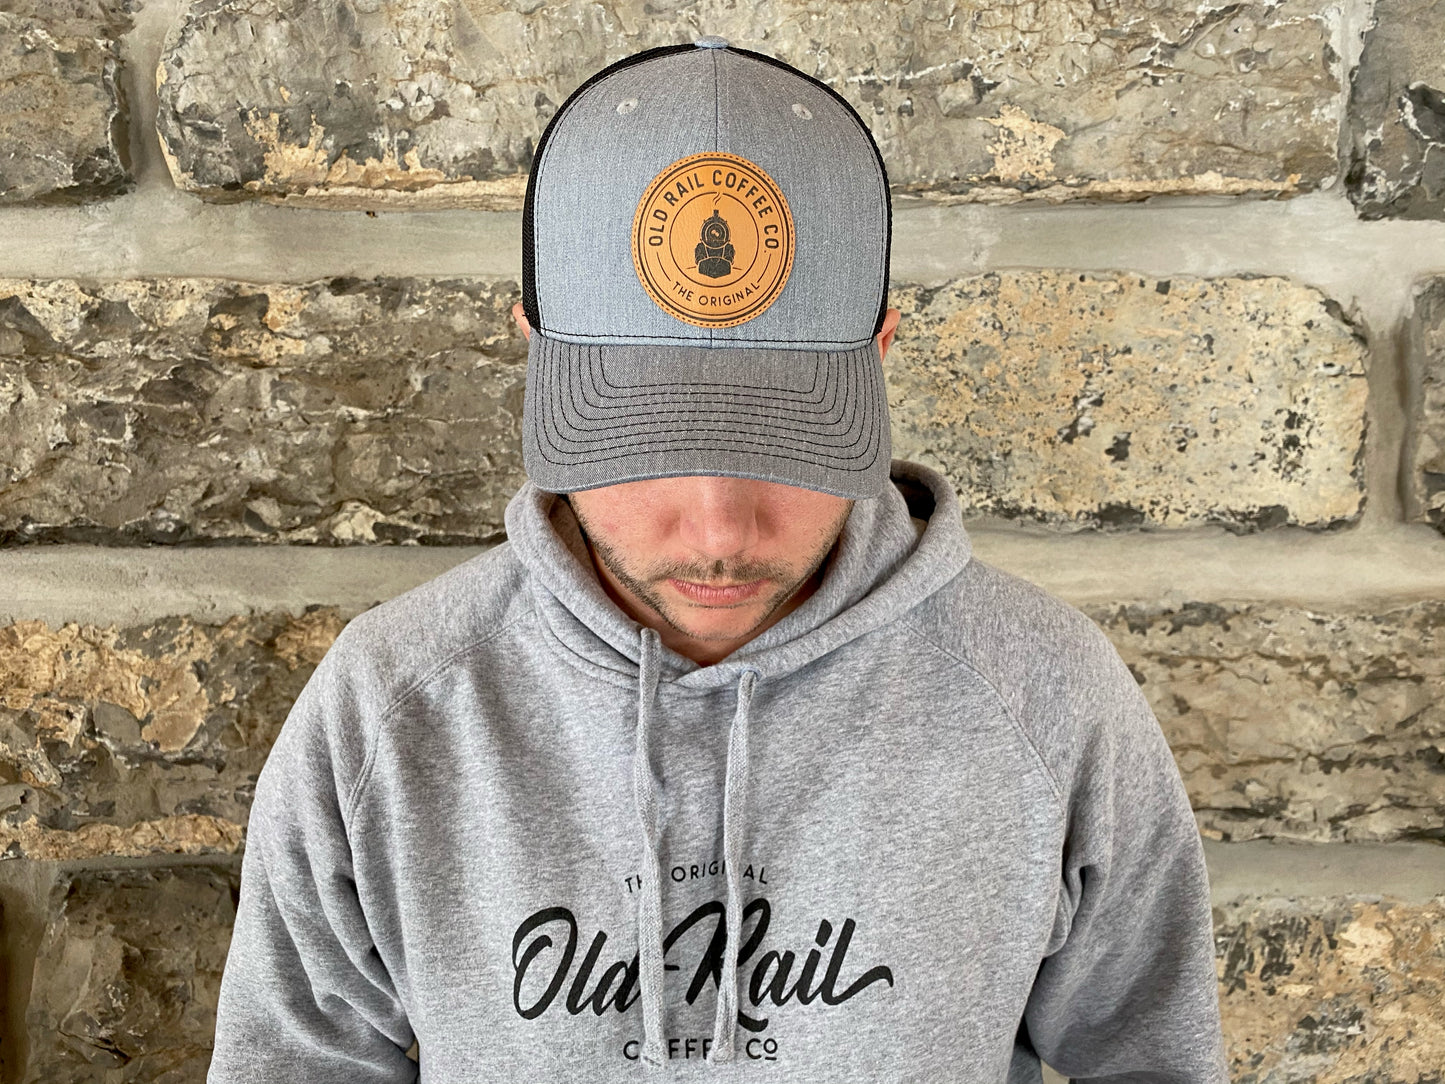 Old Rail Coffee Co Snapback, Grey, Black Mesh, Adjustable Snapback, Circle Patch Logo, Represent your favorite Coffee Company